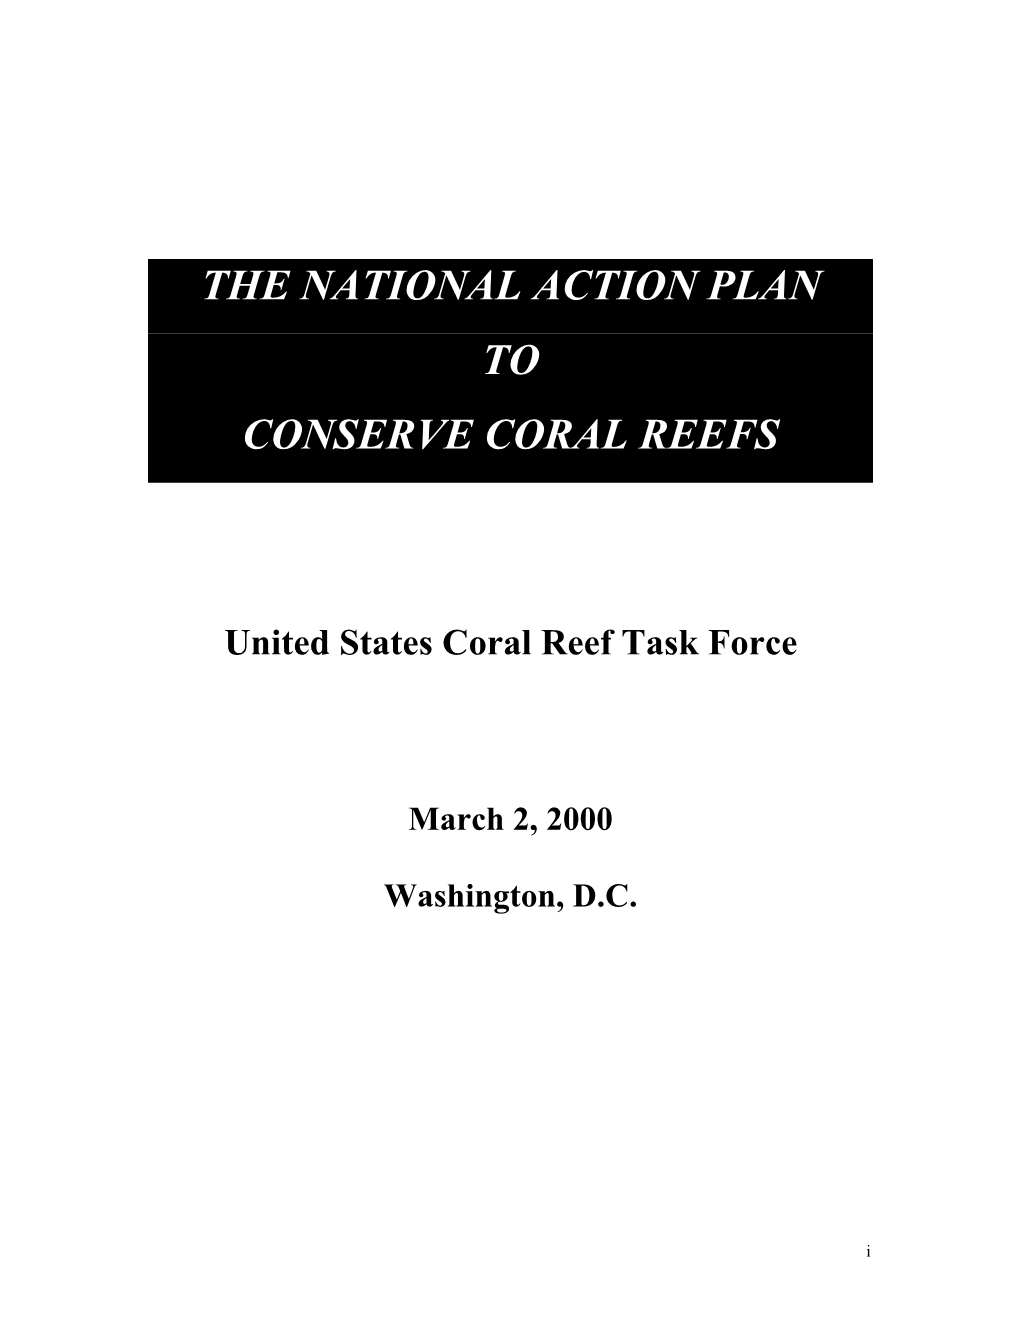 National Action Plan to Conserve Coral Reefs